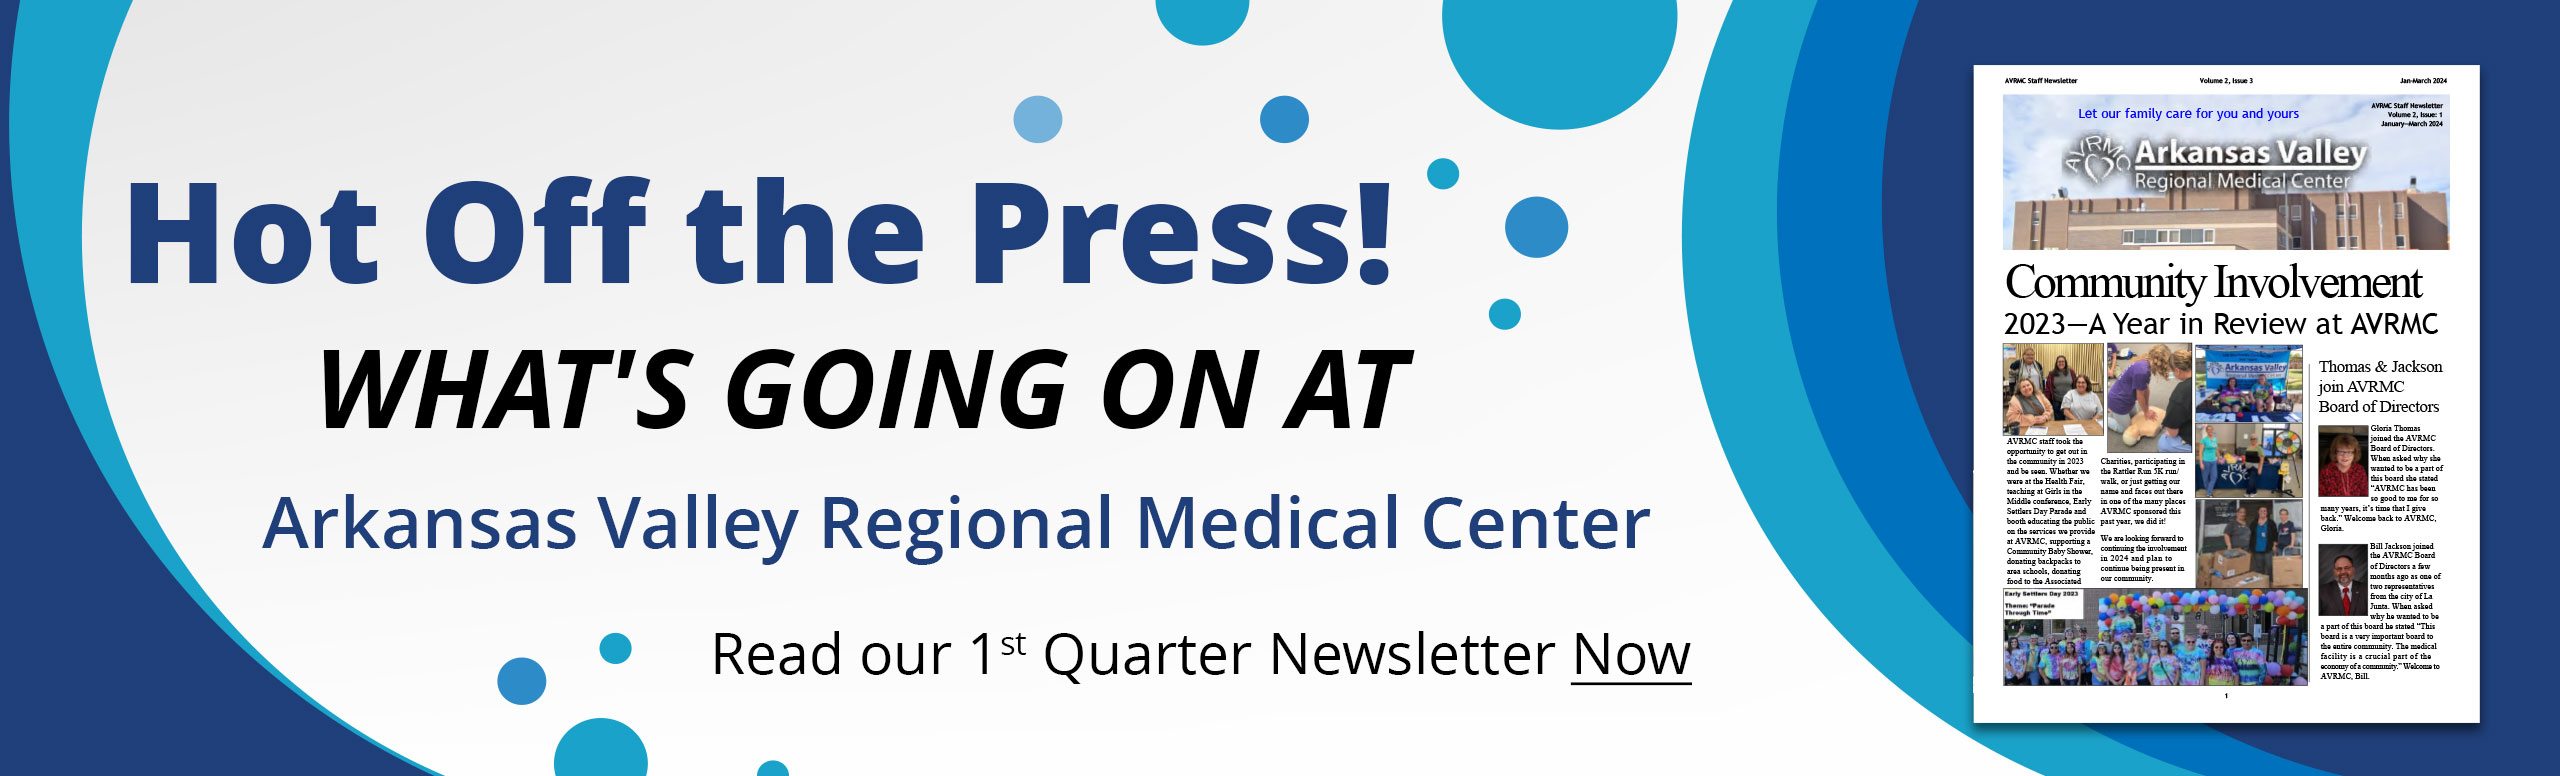 Hot Off the Press!  What's going on at Arkansas Valley Regional Medical Center....

Read our 3rd Quarter Newsletter Now.